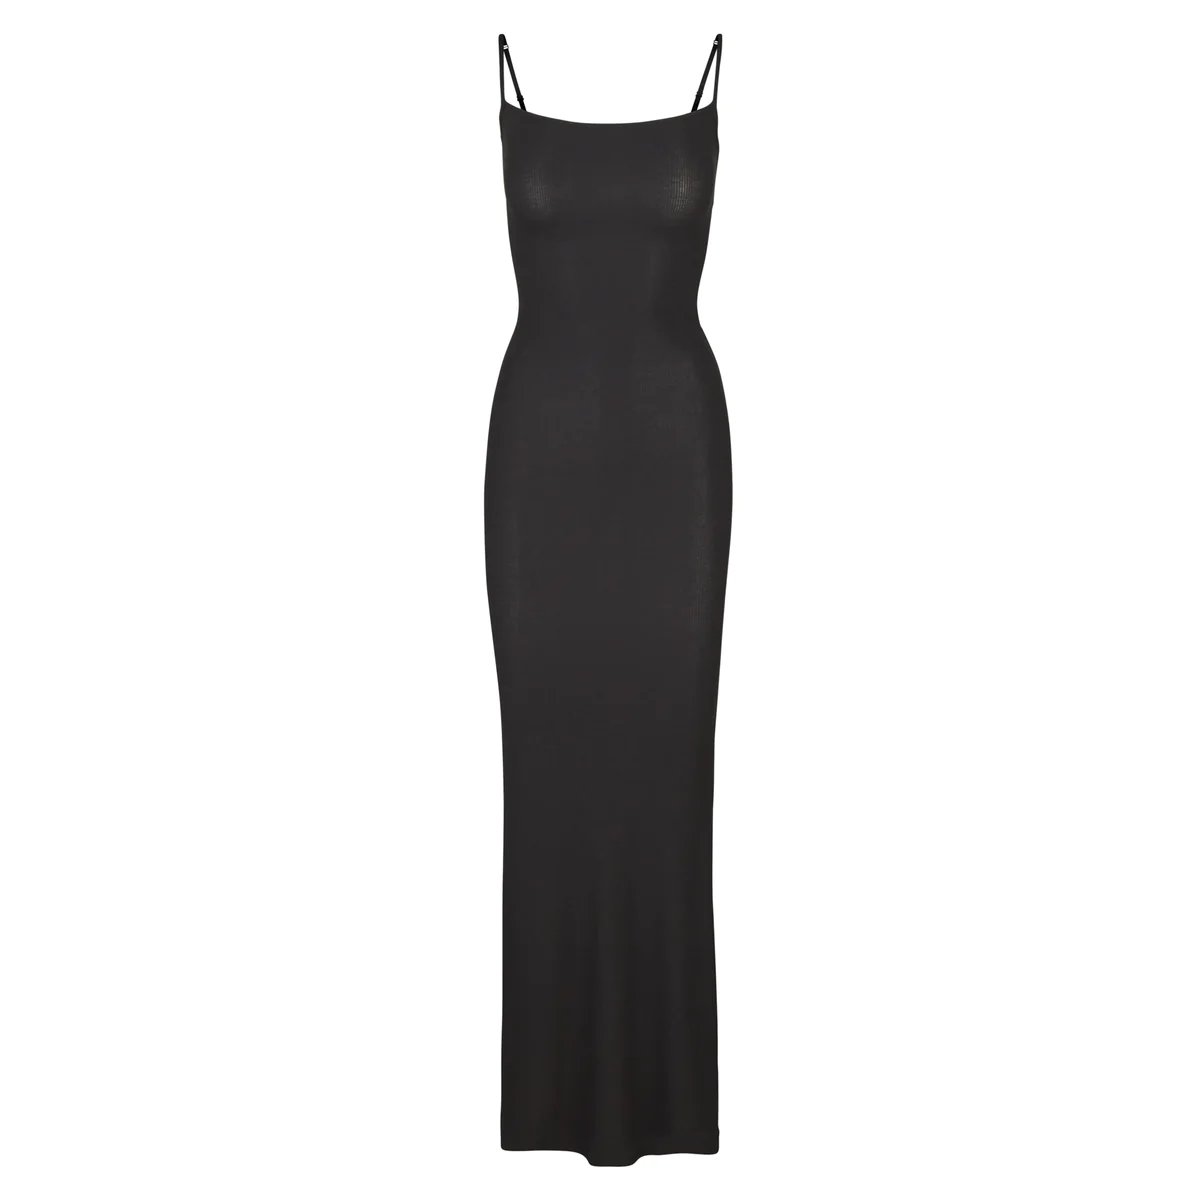 Shop This Flattering Skims Lookalike Dress for 45% Off